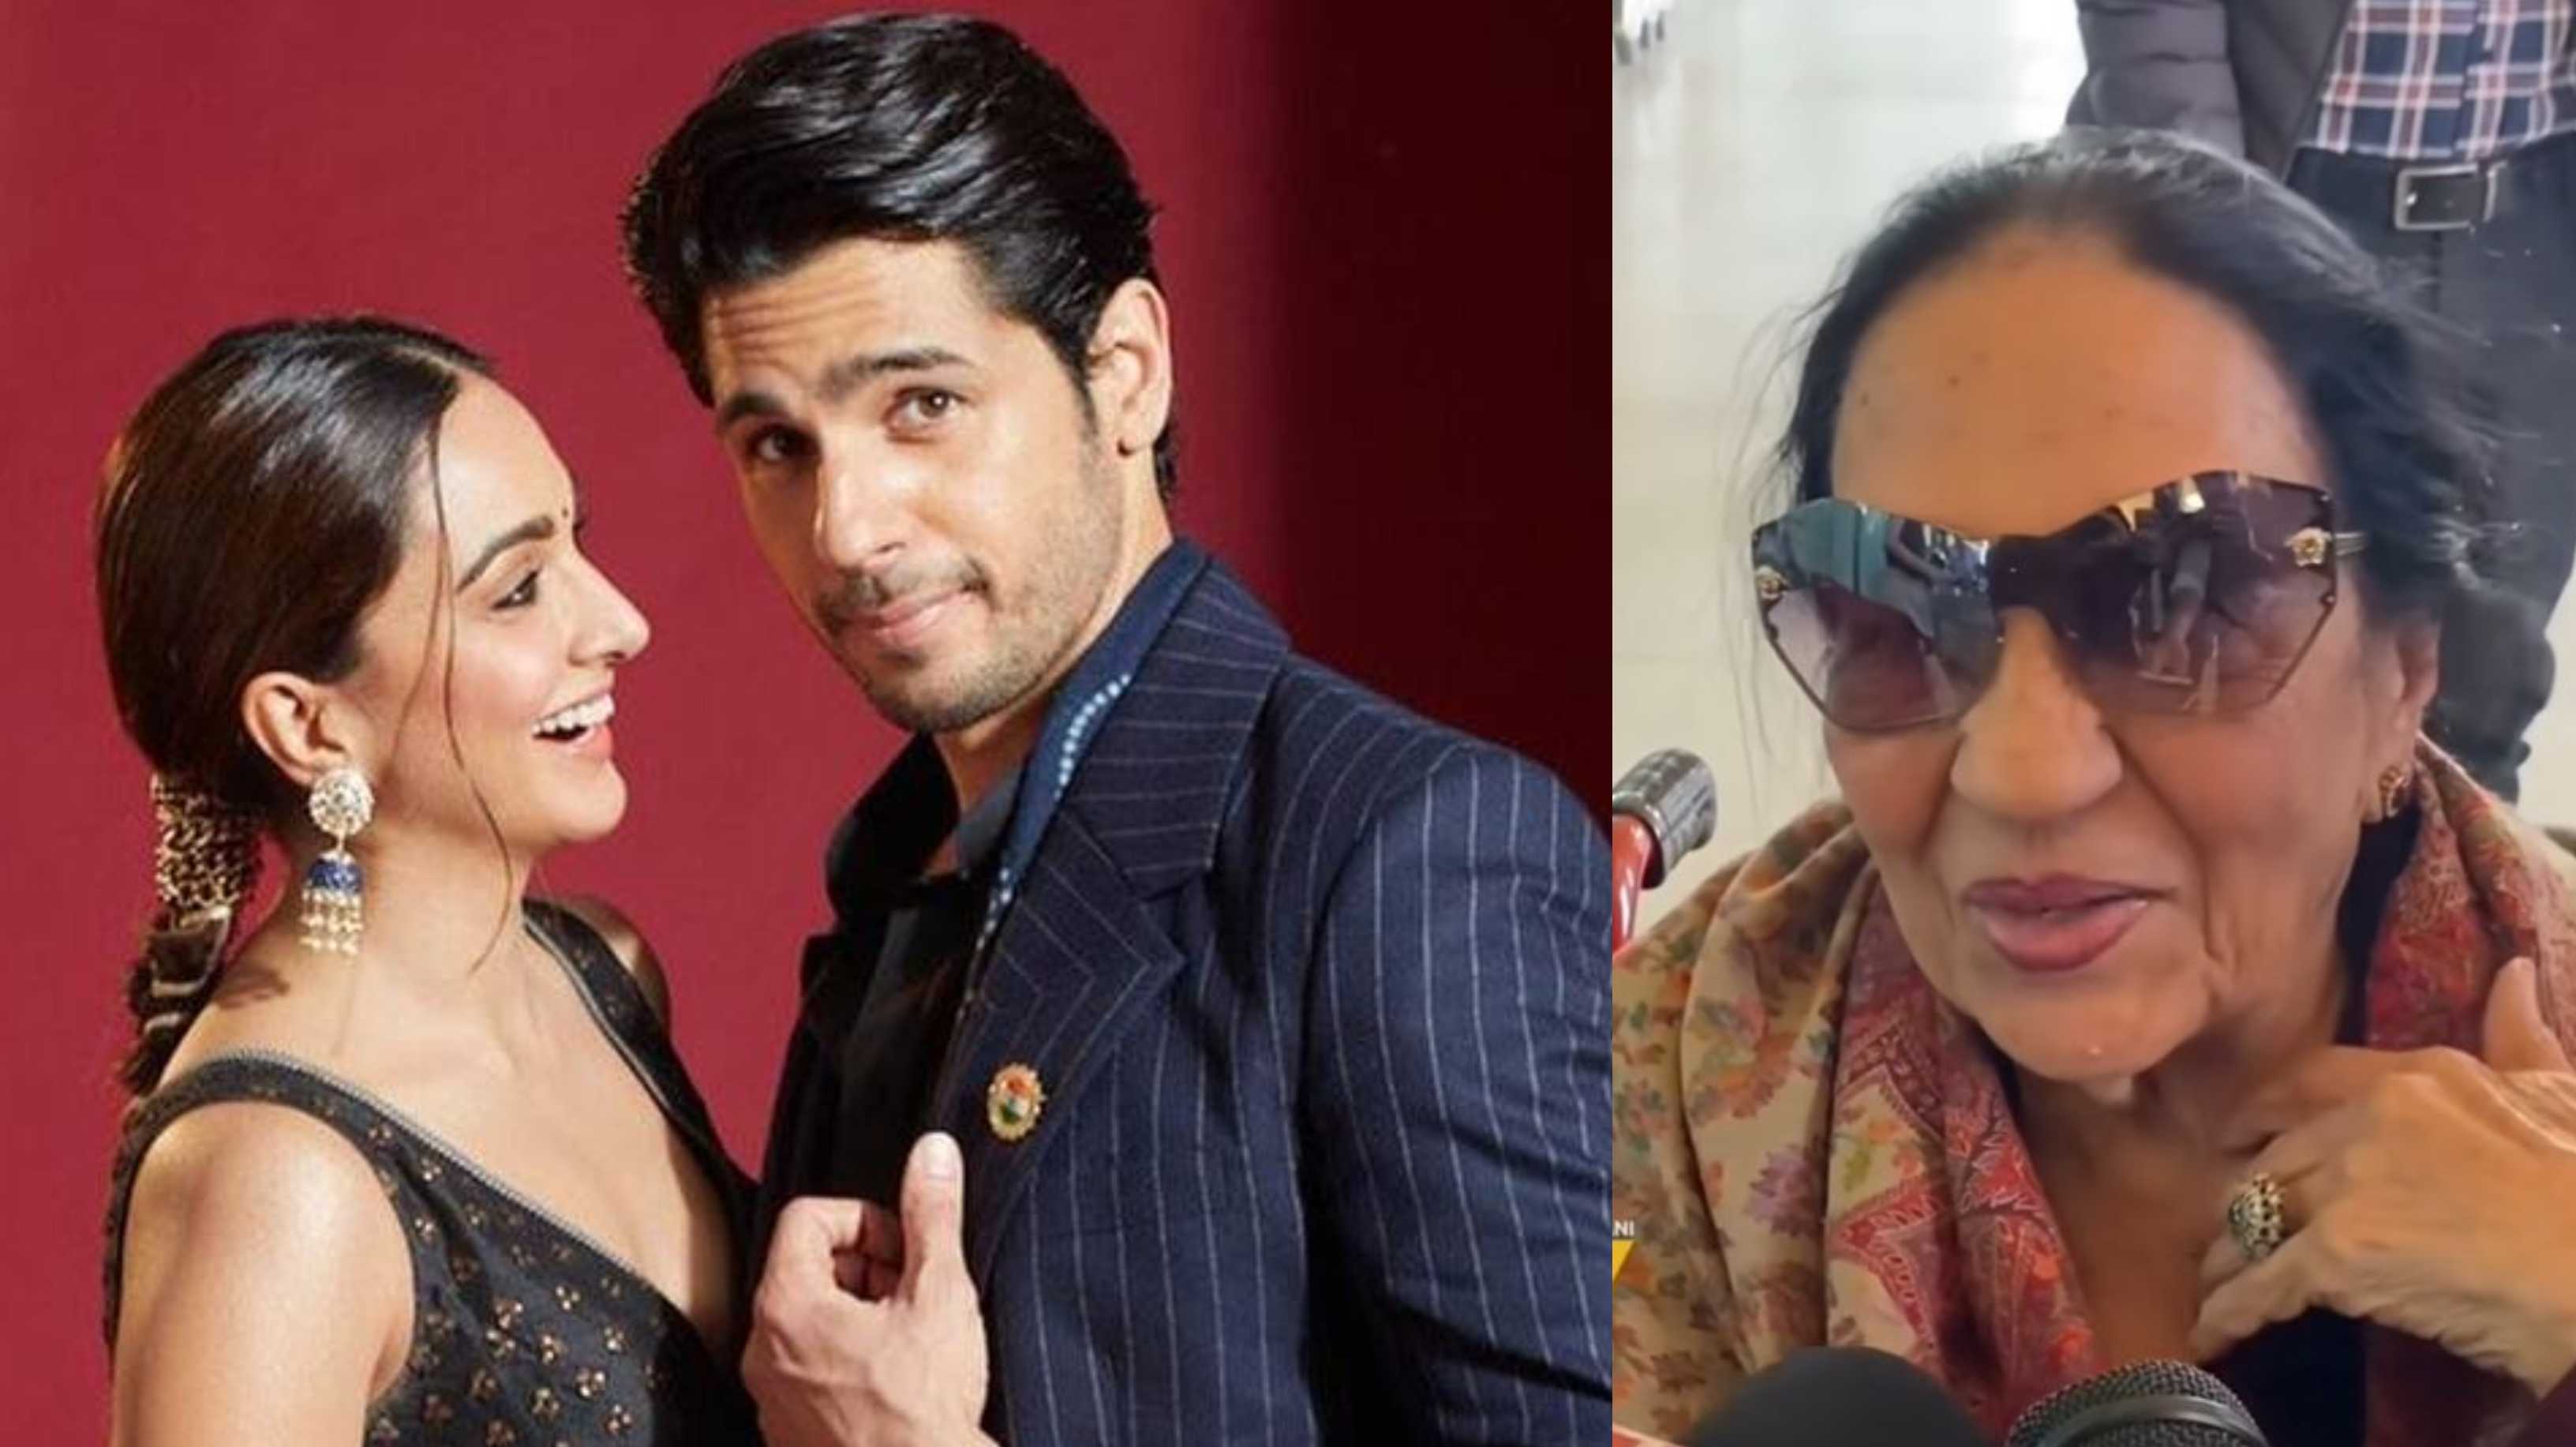 ‘Bohot badhaayi’: After Sidharth Malhotra’s mother, his naani expresses excitement about his wedding to Kiara Advani